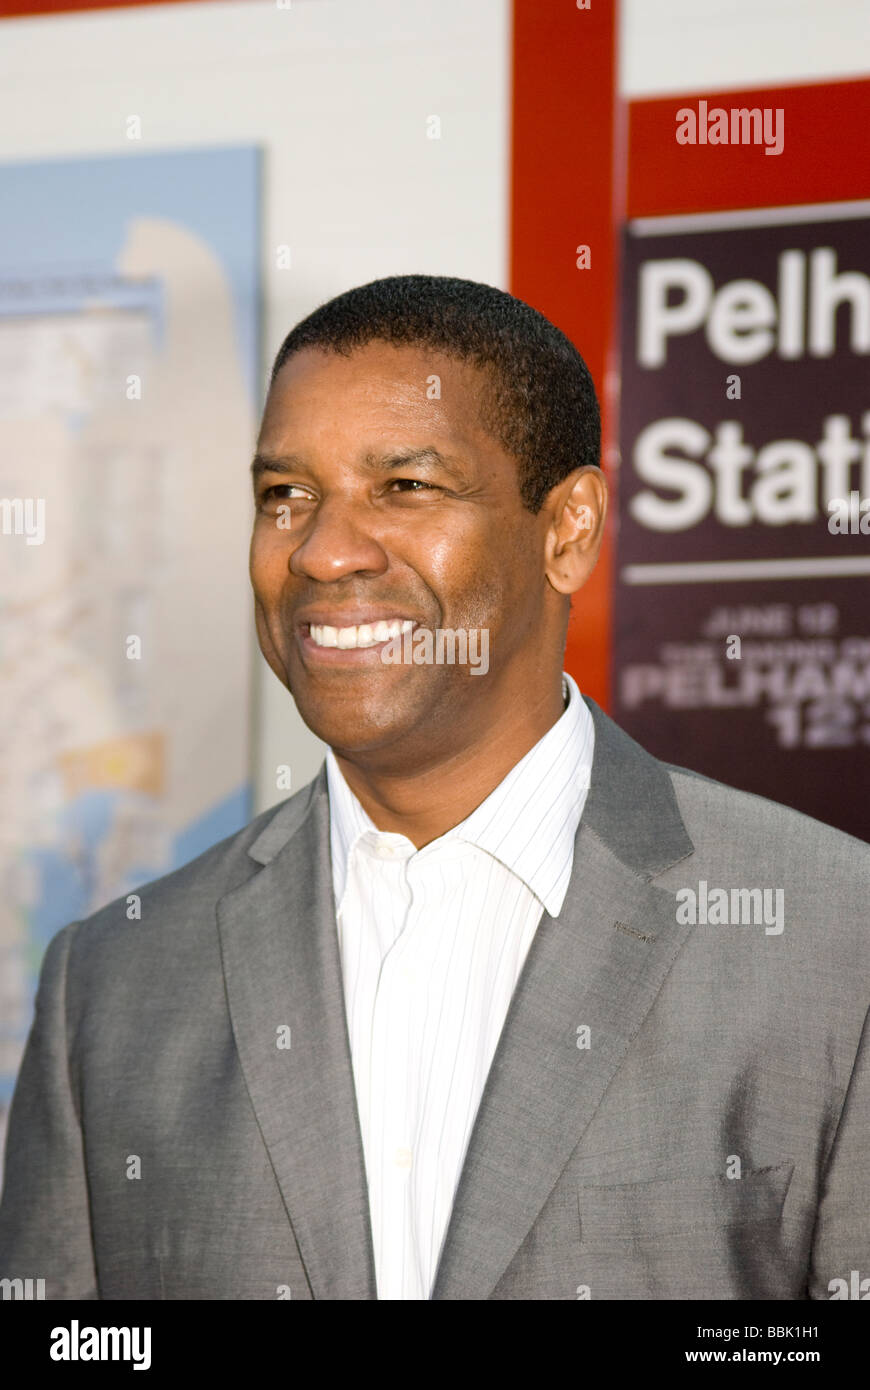 LOS ANGELES - JUNE 4: Denzel Washington arrives at the 'Taking of Pelham 123' premiere in Westwood, Los Angeles, CA on June 4, 2 Stock Photo